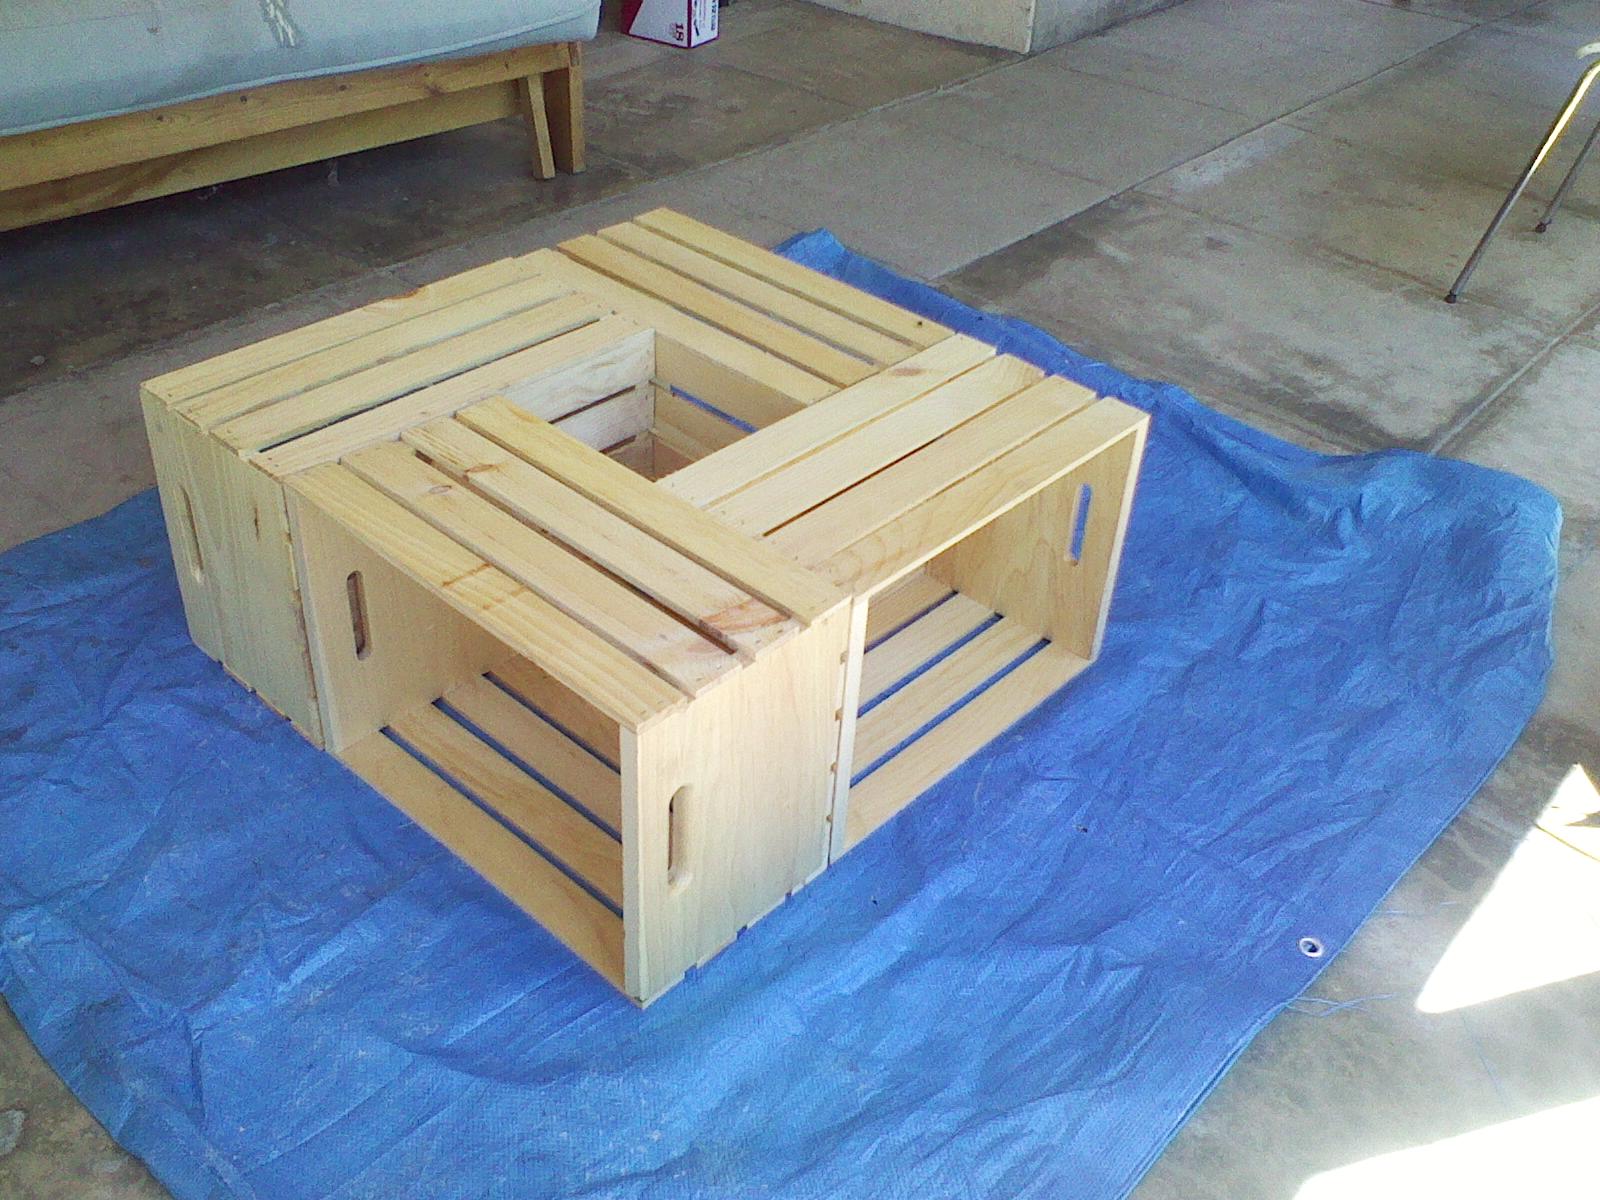 but, I digress: Wooden Crate Coffee Table - Day 2